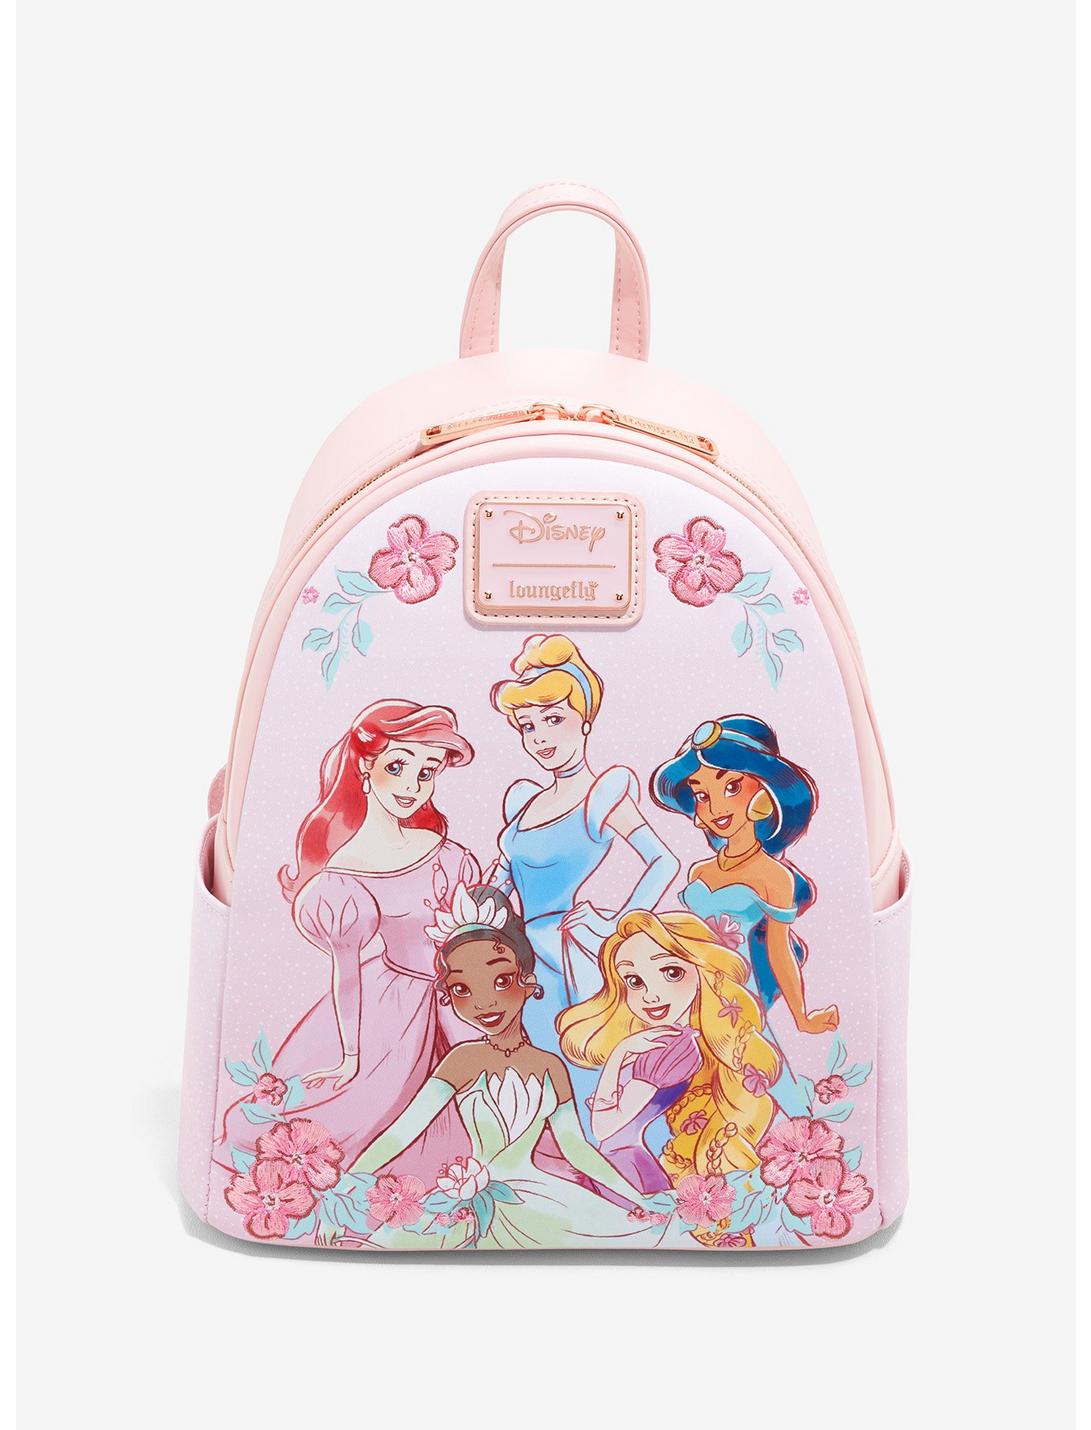 Loungefly Disney Princesses Floral Mini Backpack - BoxLunch Exclusive